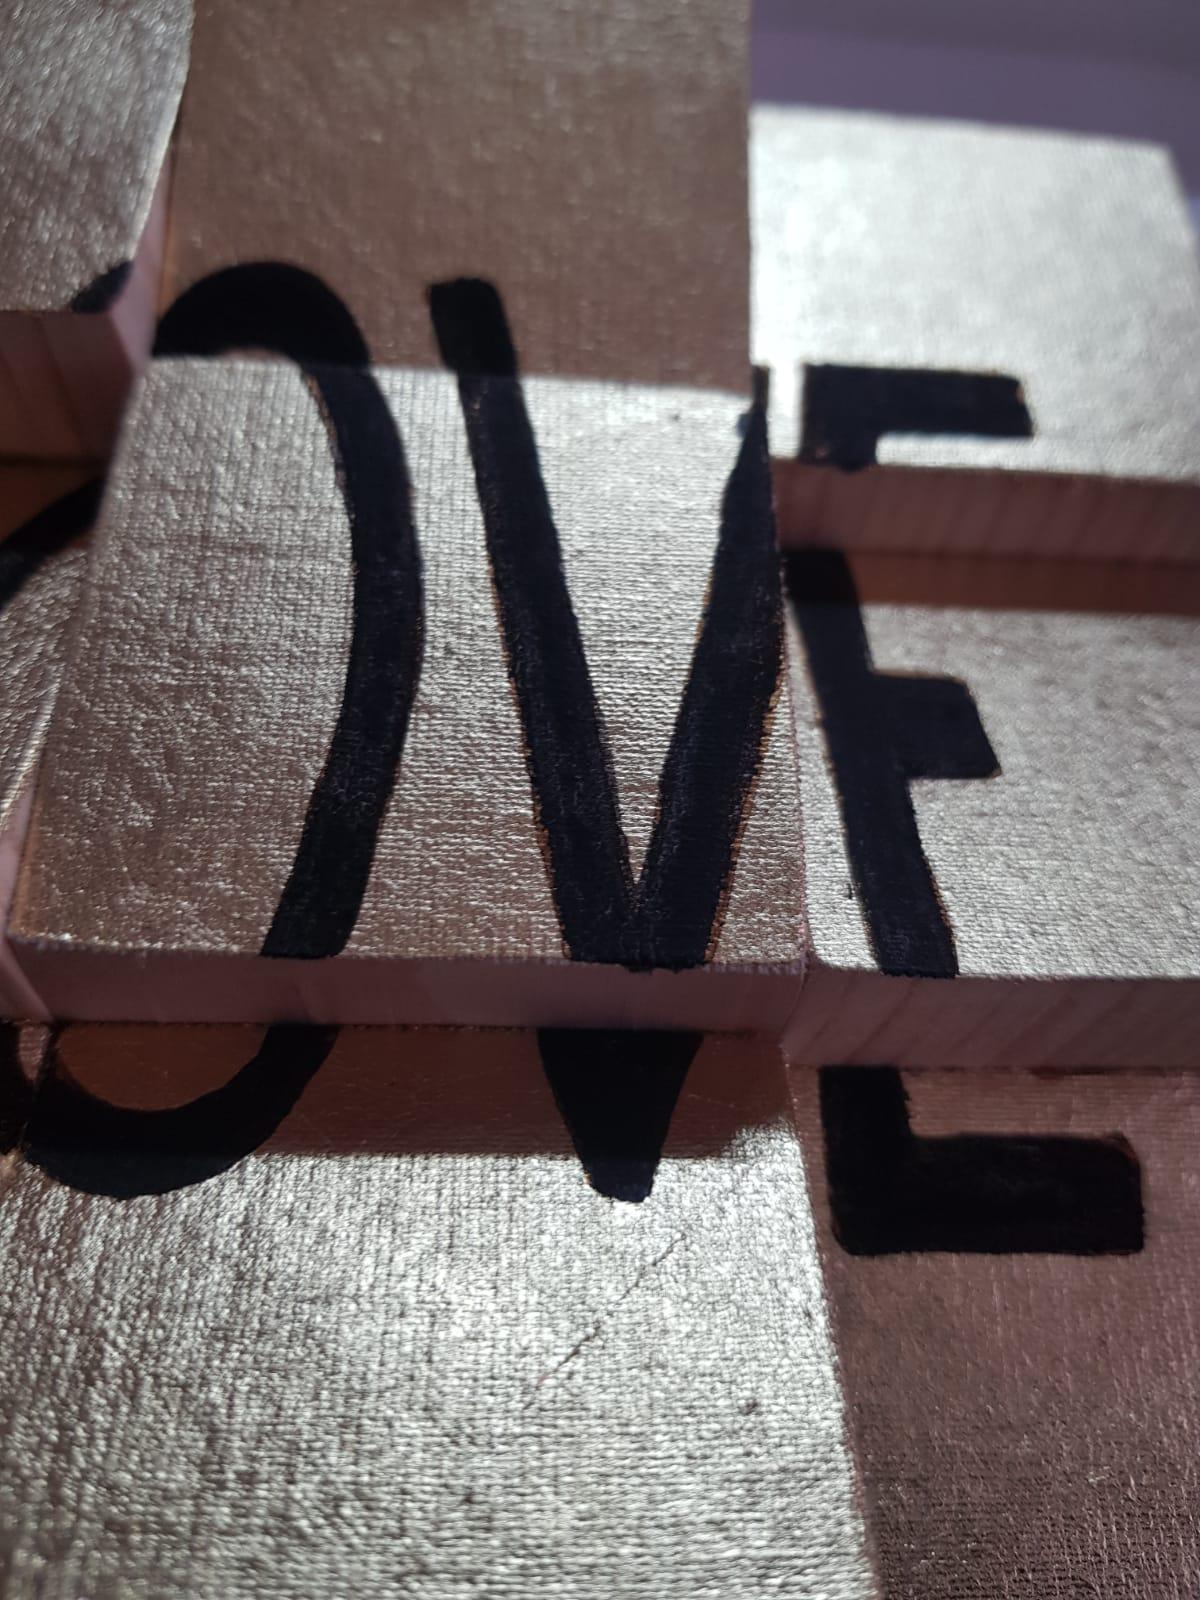 Love is an Original, Conceptual, Contemporary Art Piece.  Acrylic Paint on Canvas applied onto Wooden Blocks Personally Signed. 
Each block is then painted with acrylic paint on Acrylic Paint on Cotton Paper. If miscalculated at any point of the